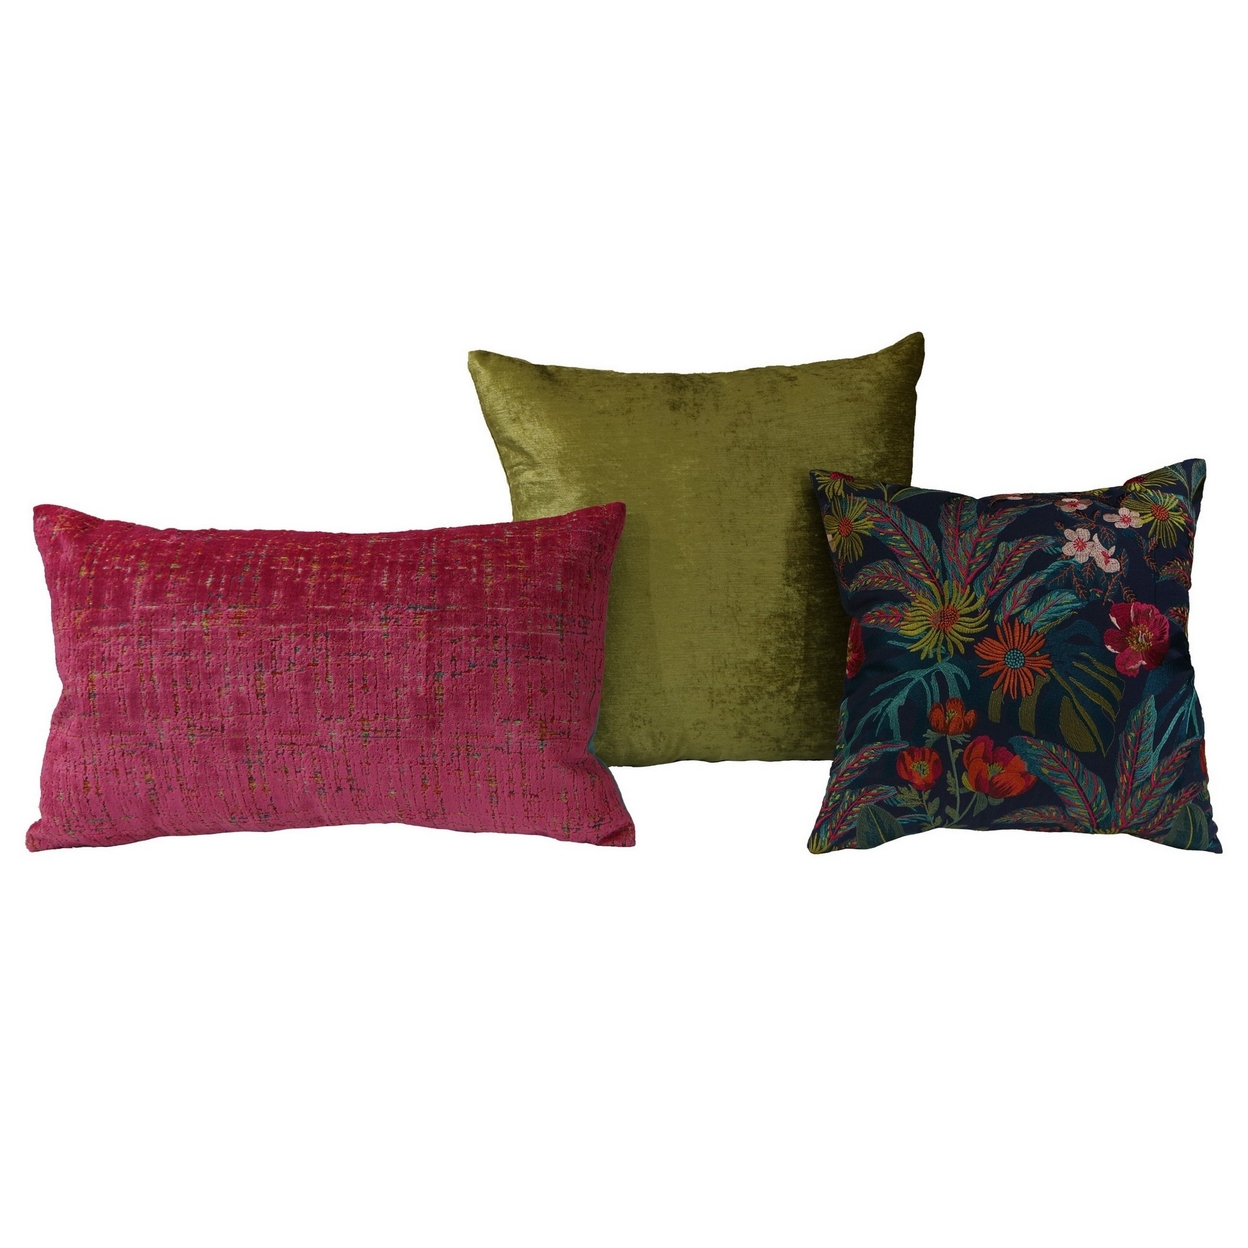 Jill 3 Colorful Accent Throw Pillow Set, Chenille, Botanical Embroidery - Saltoro Sherpi